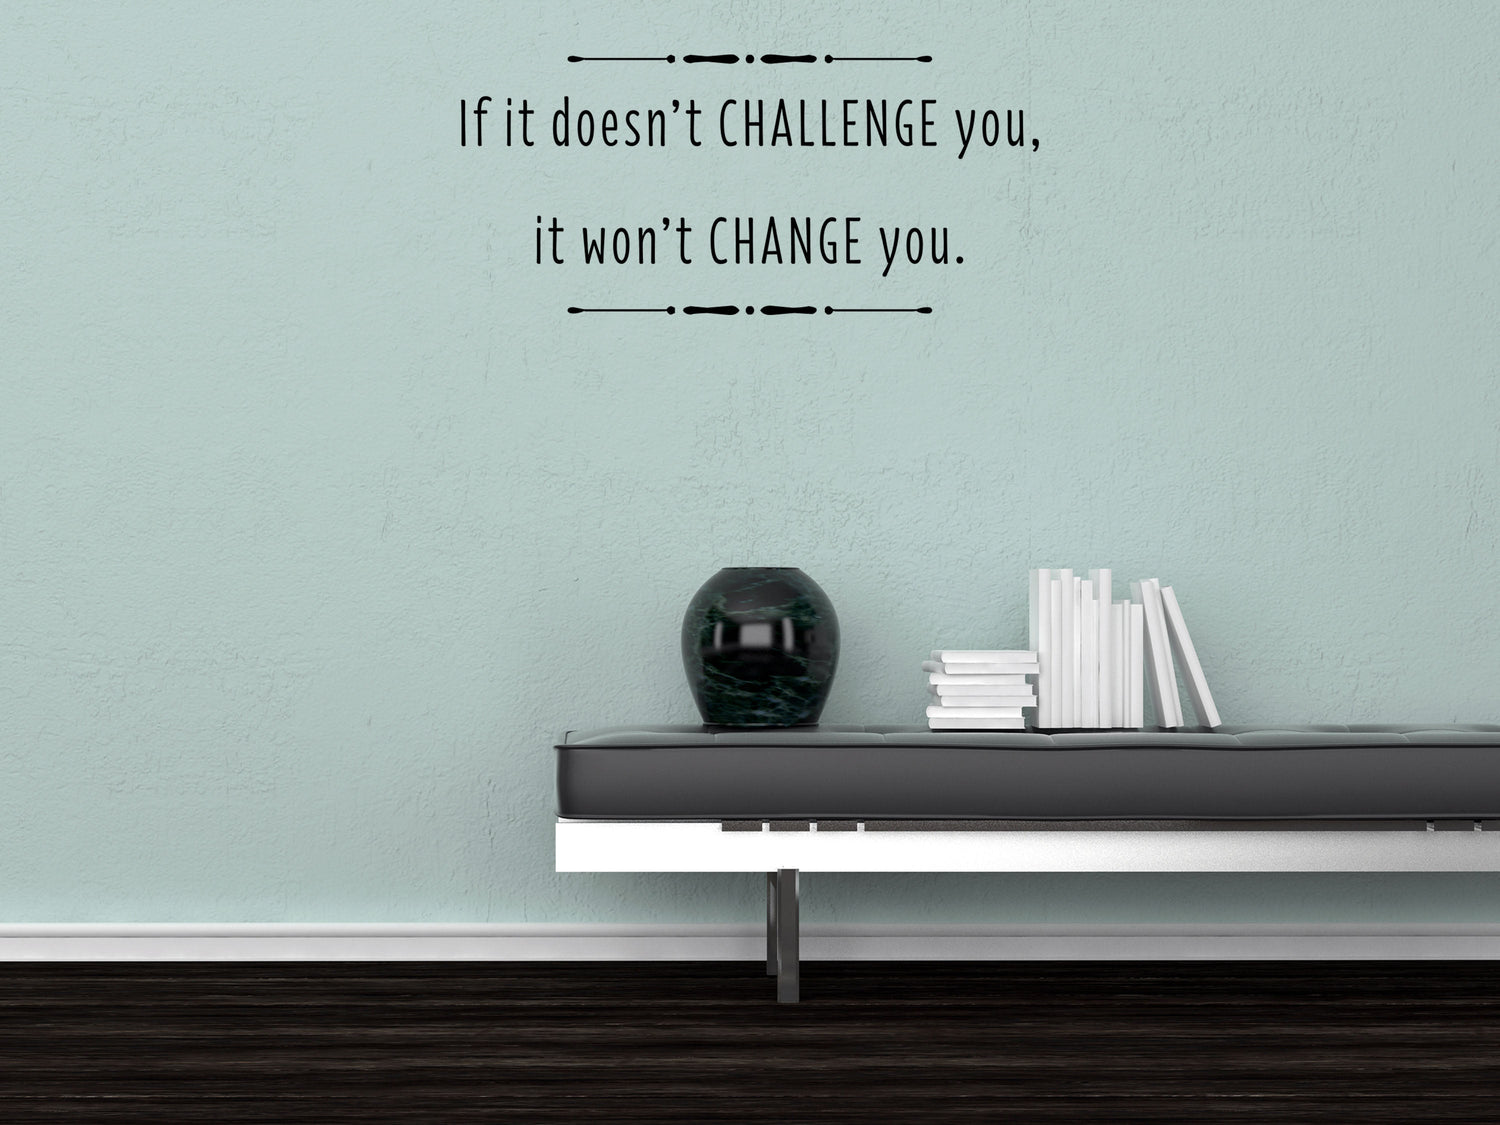 If It Doesn't Challenge Motivational Sticker Quote Vinyl Wall Decal Inspirational Wall Signs 